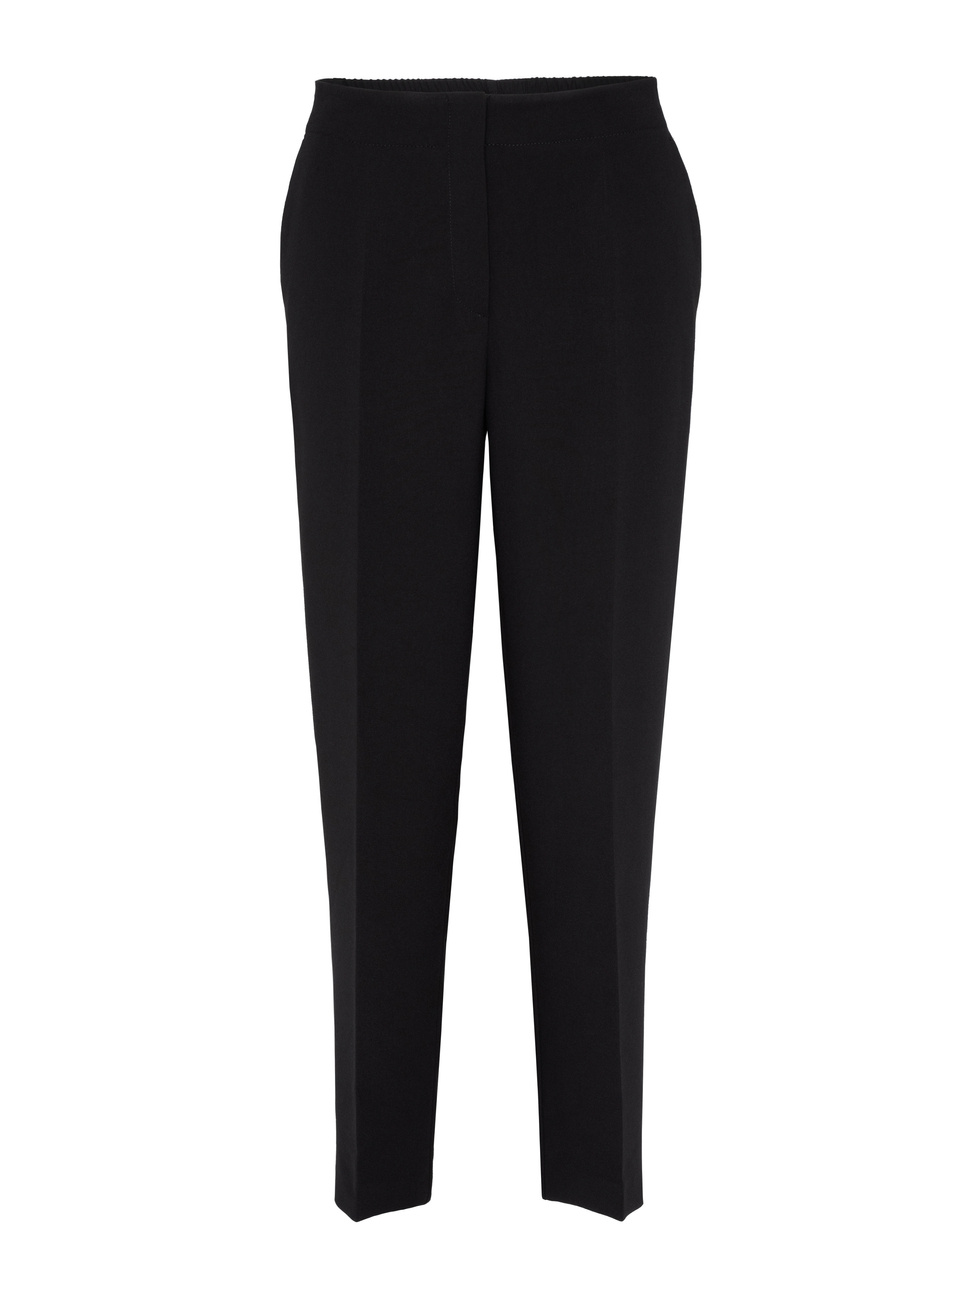 High-rise pants with a crease